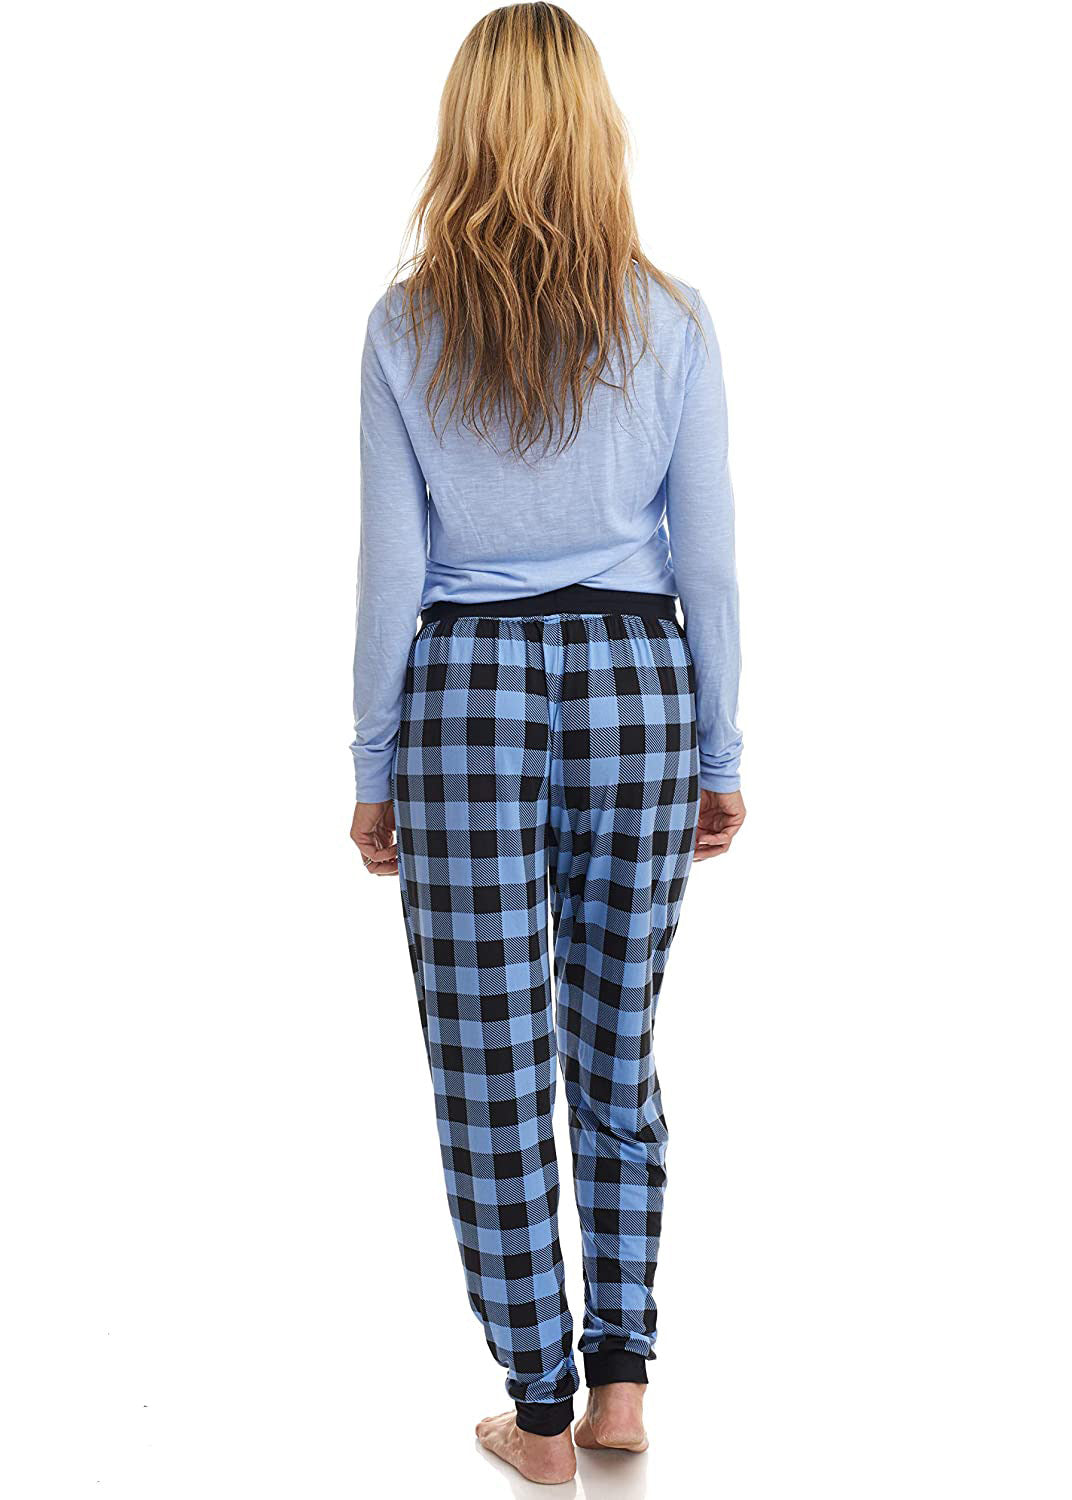 
                  
                    PJ joggers with soft velvety texture, stretch, elastic waistband, drawstring, and stylish ankle cuff. This pattern is plaid black and blue.
                  
                